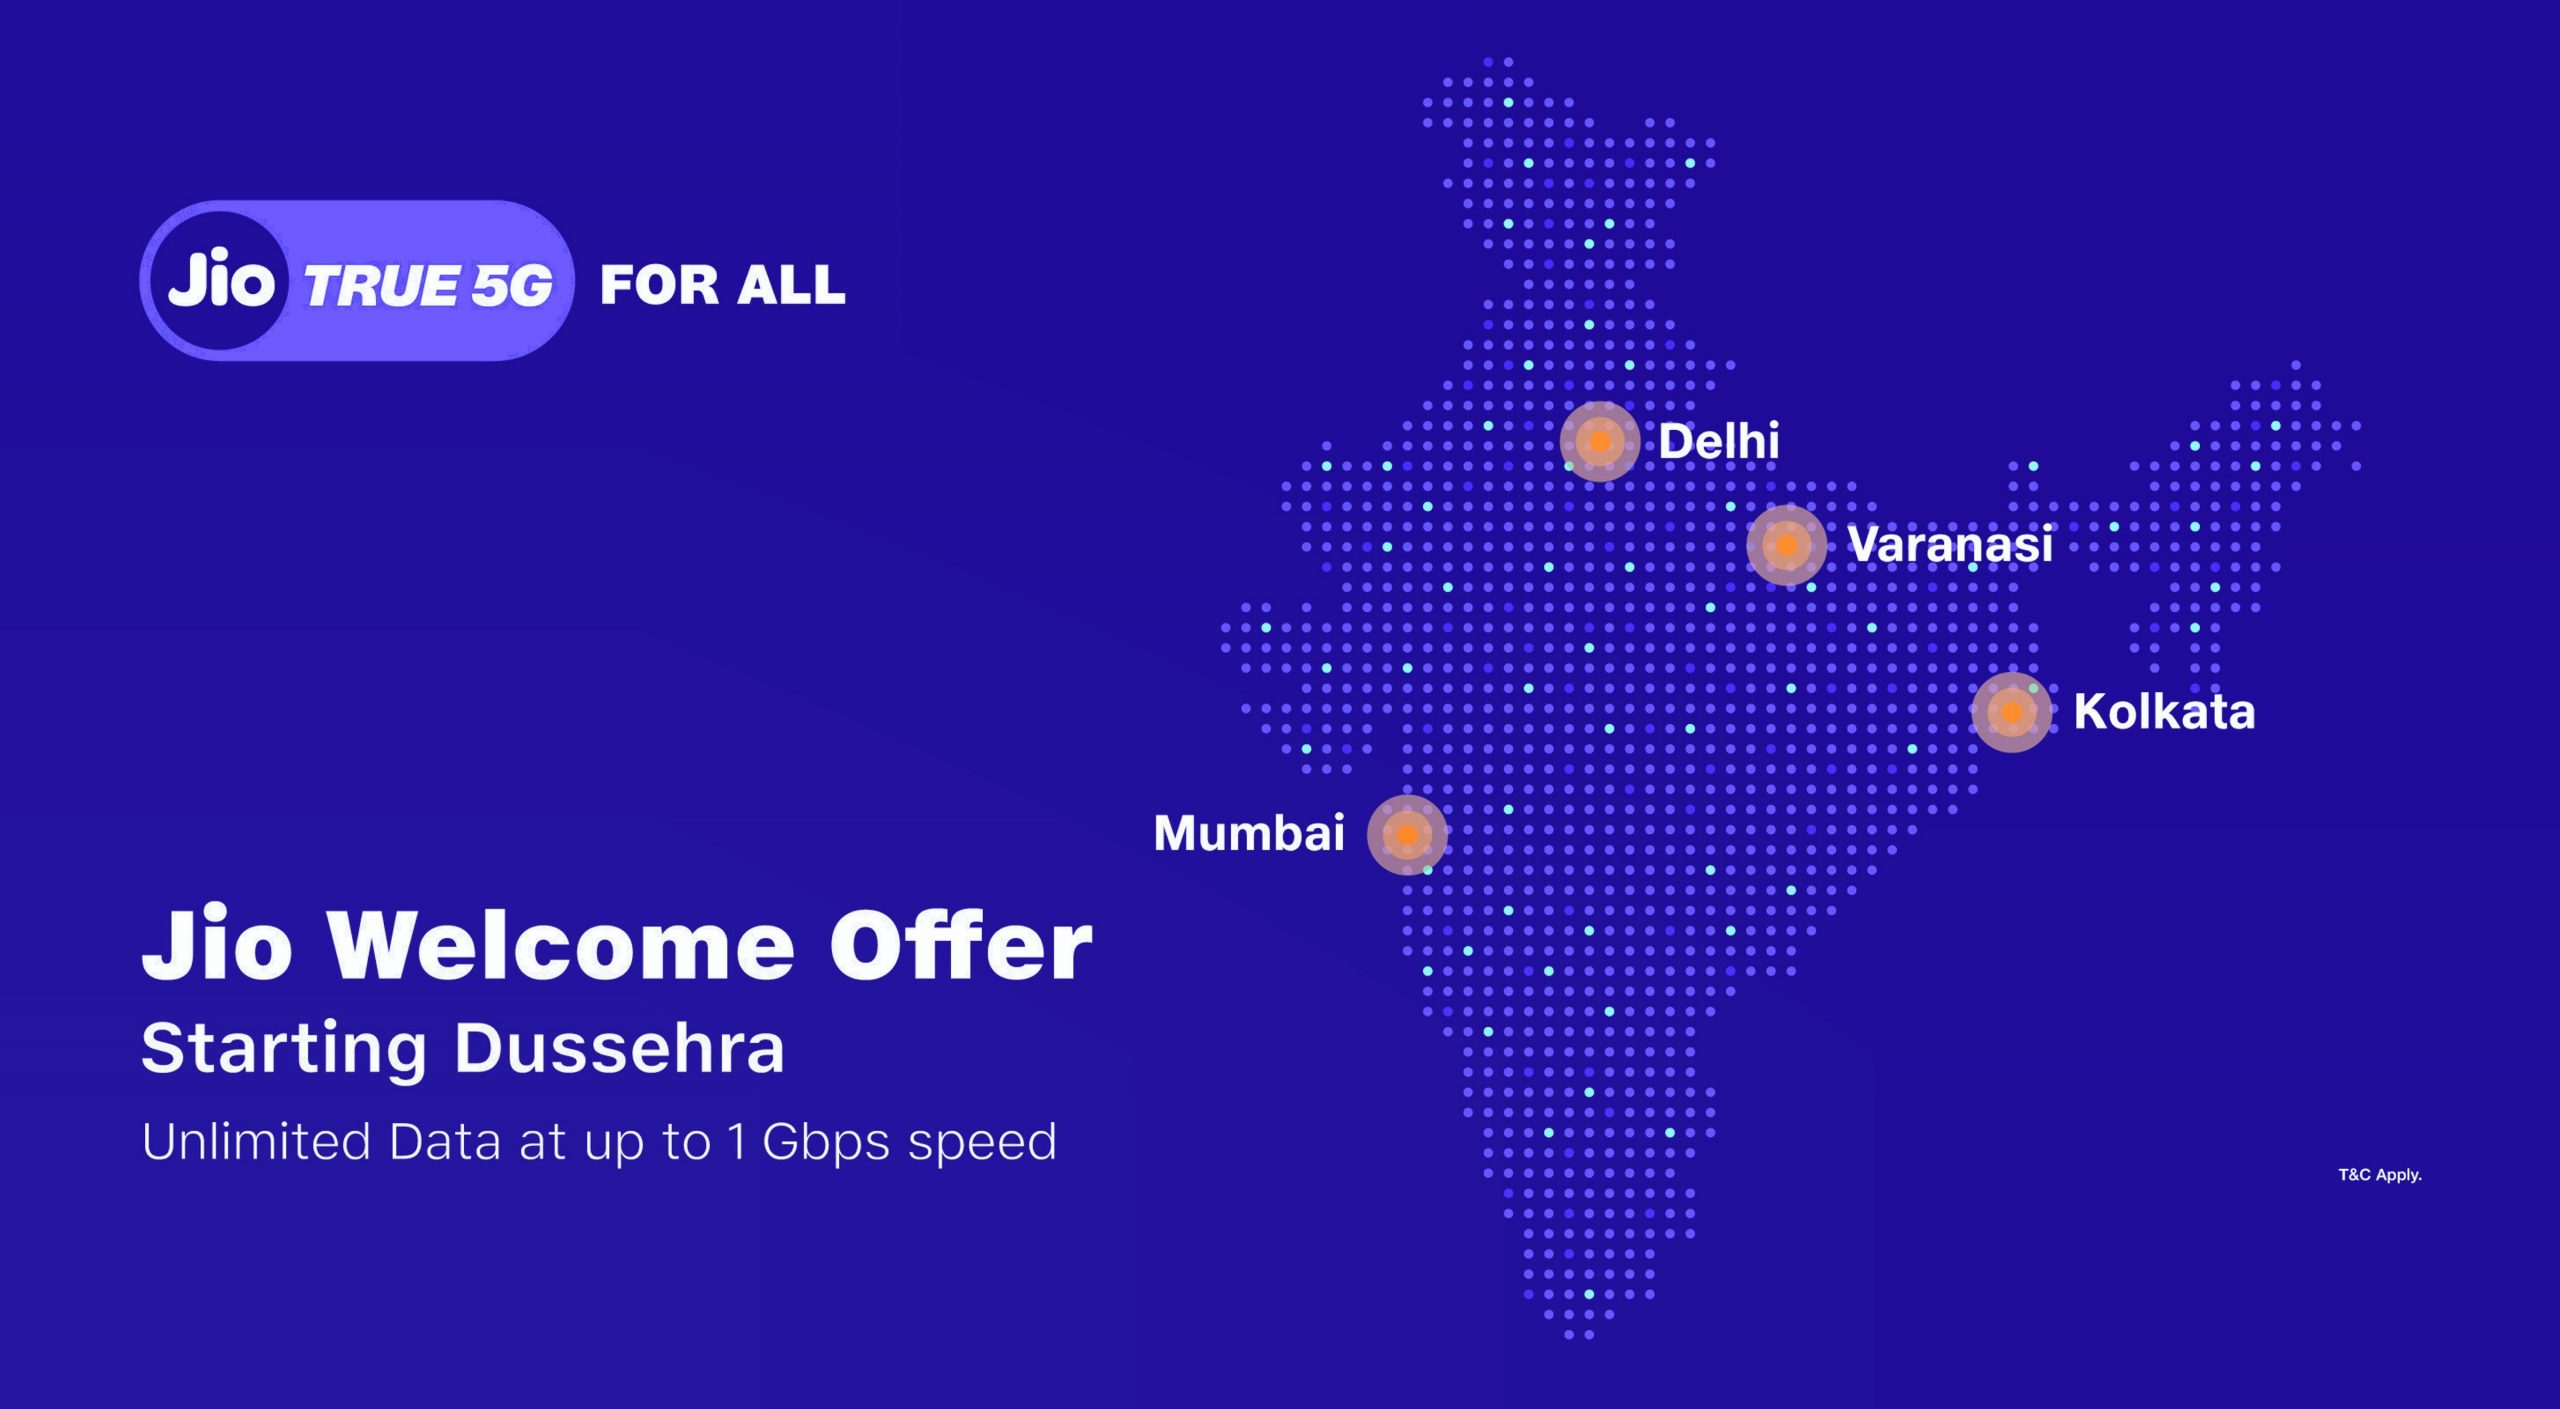 Reliance Jio launches beta trial of Jio True 5G services in four cities